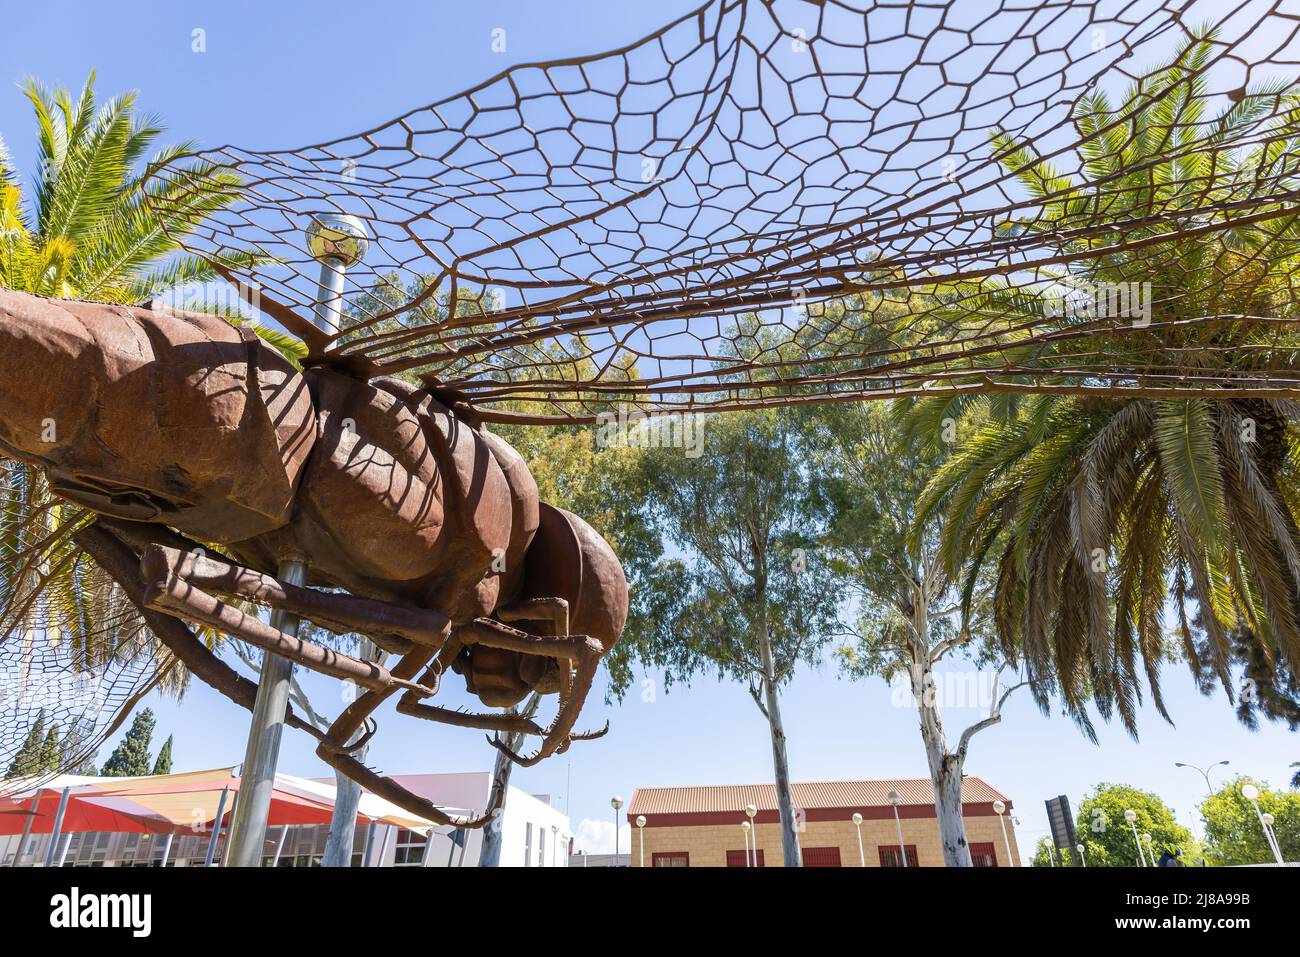 Huelva, Spain - April 28, 2022: Partial view of the monument to a dragonfly made in corten steel, in the Campus de “El Carmen” of the Huelva Universit Stock Photo